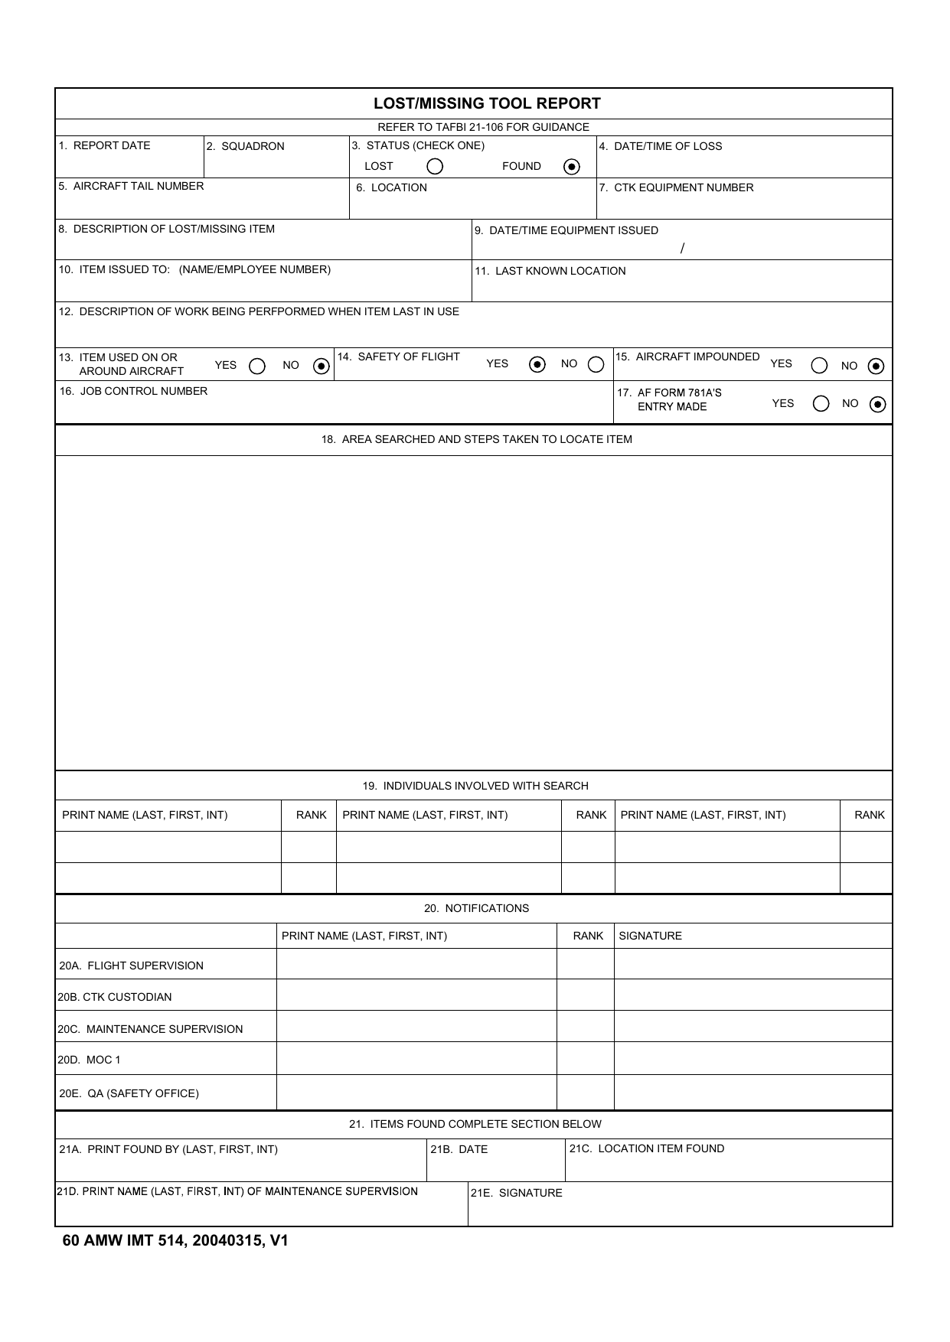 60 AMW IMT Form 514 Lost / Missing Tool Report, Page 1